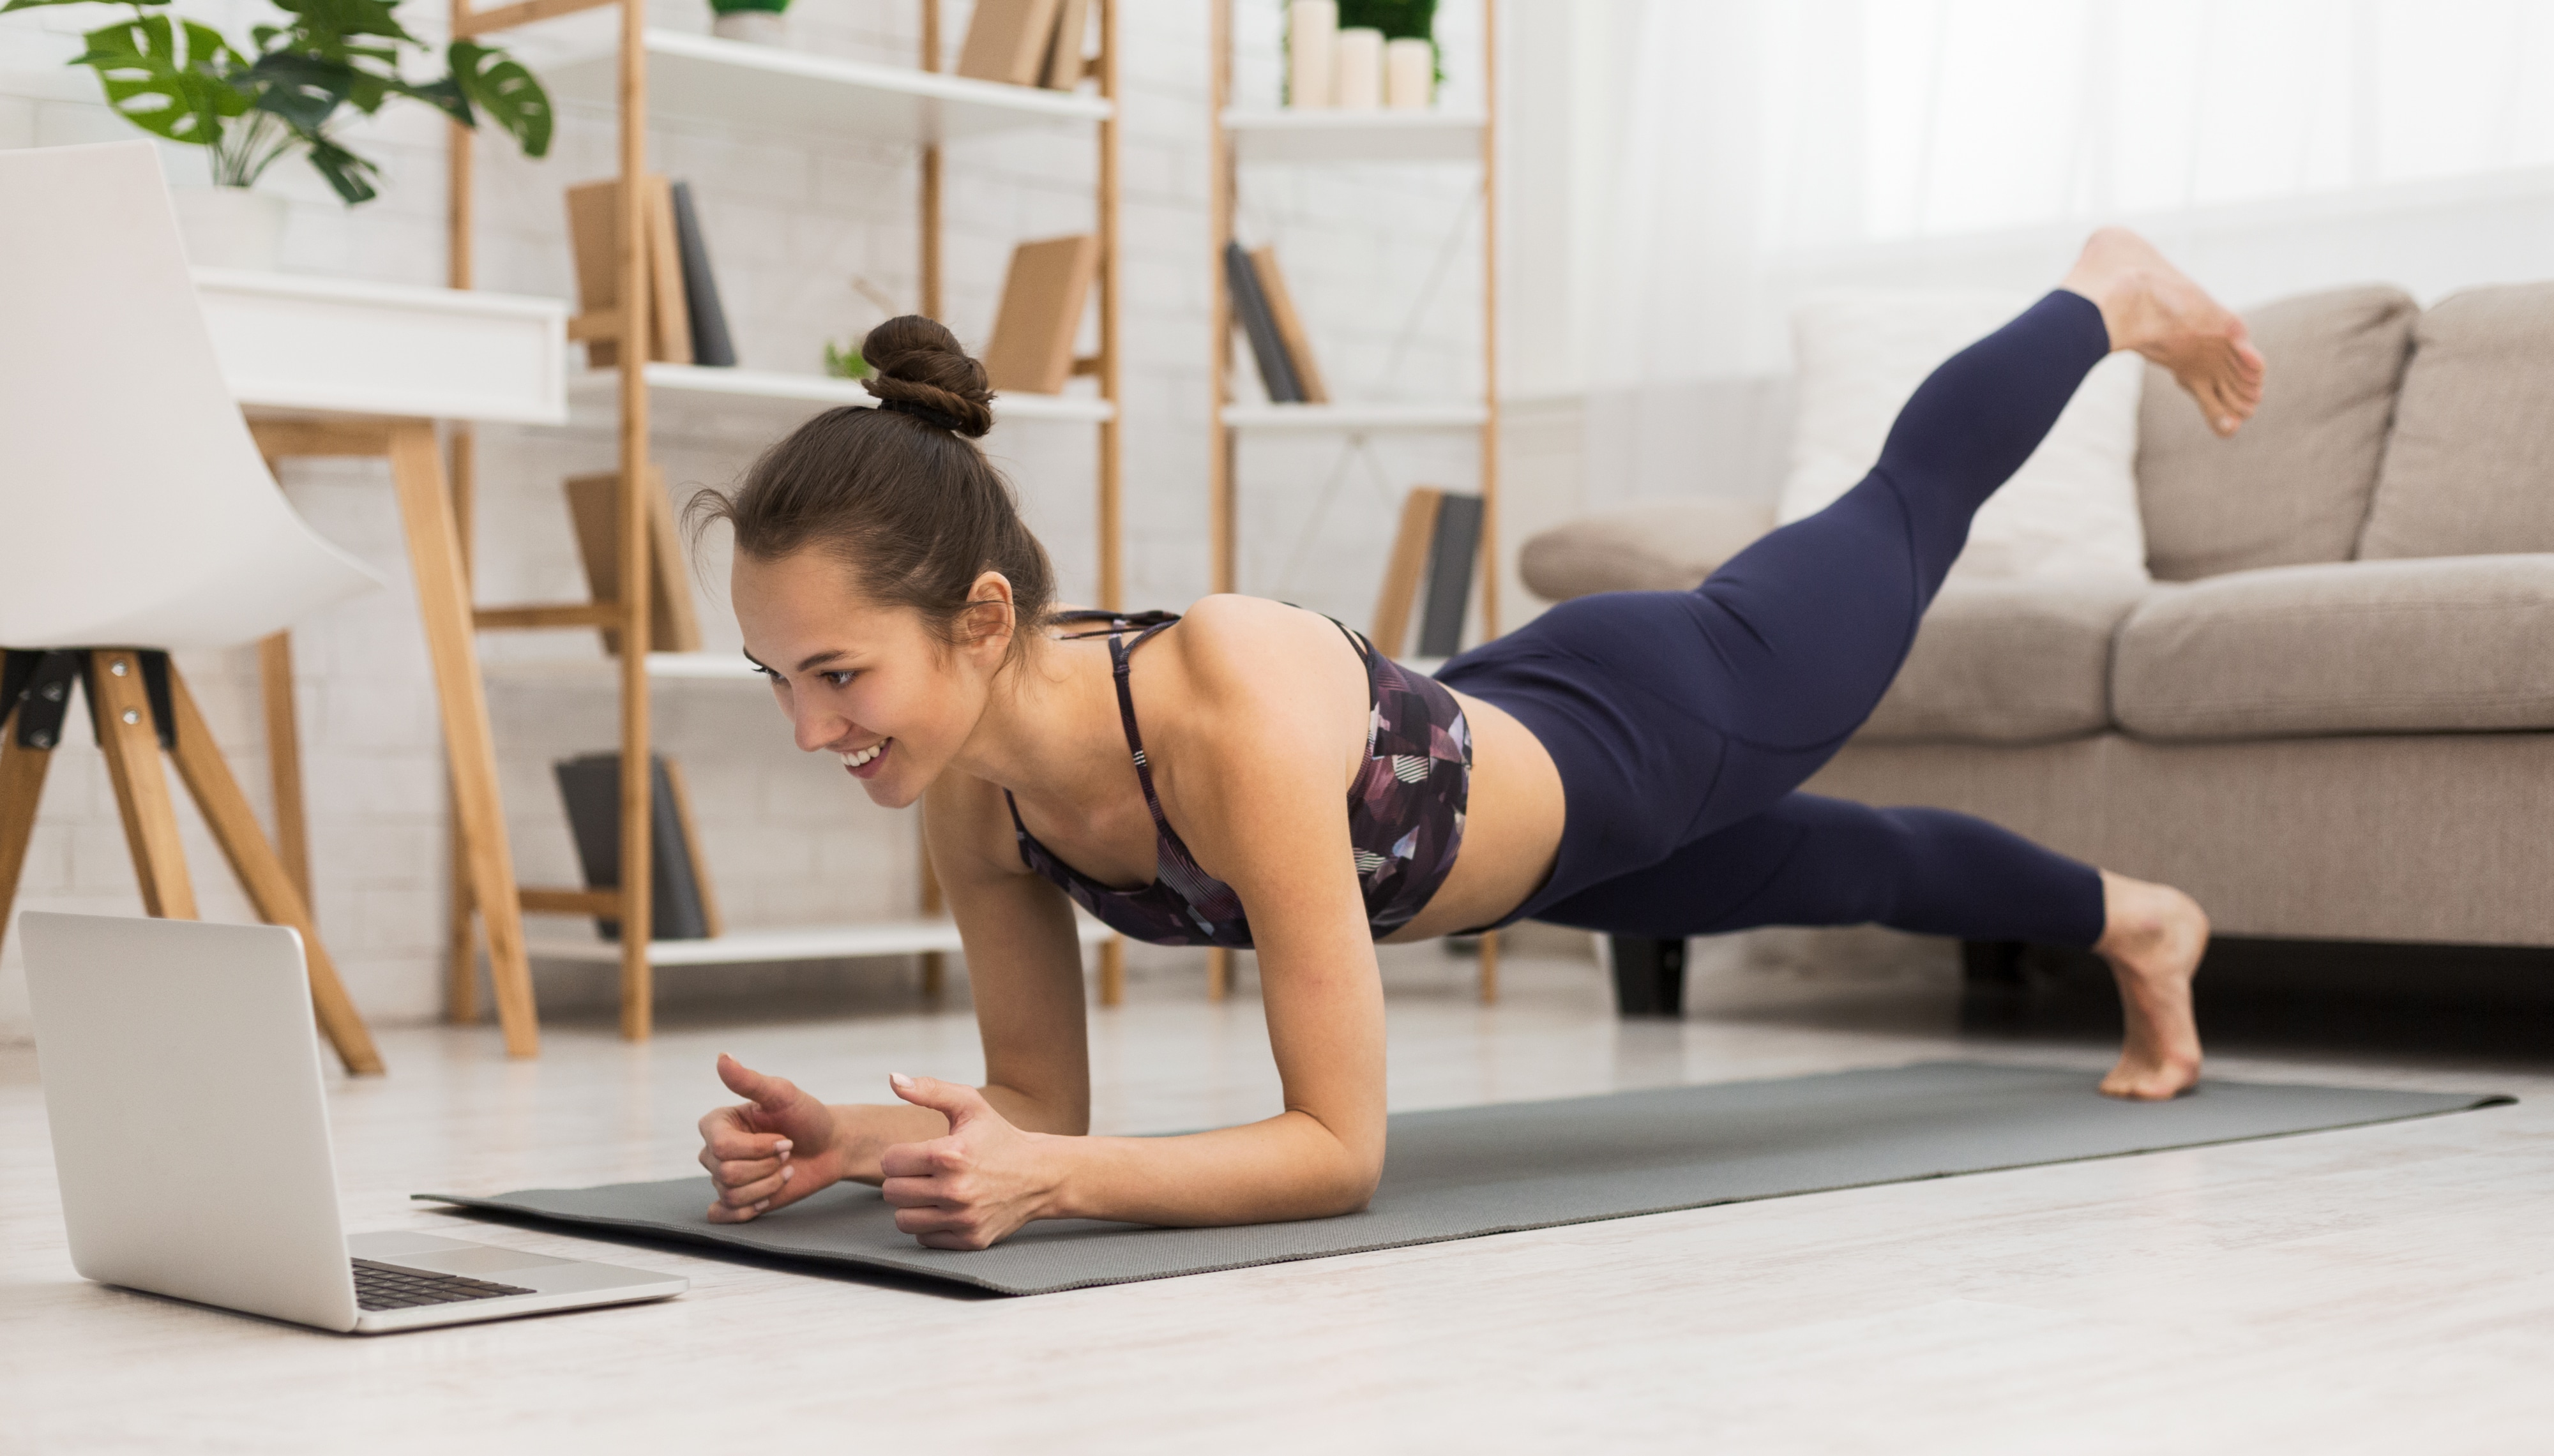 How Much Does a Pilates Certification Cost?